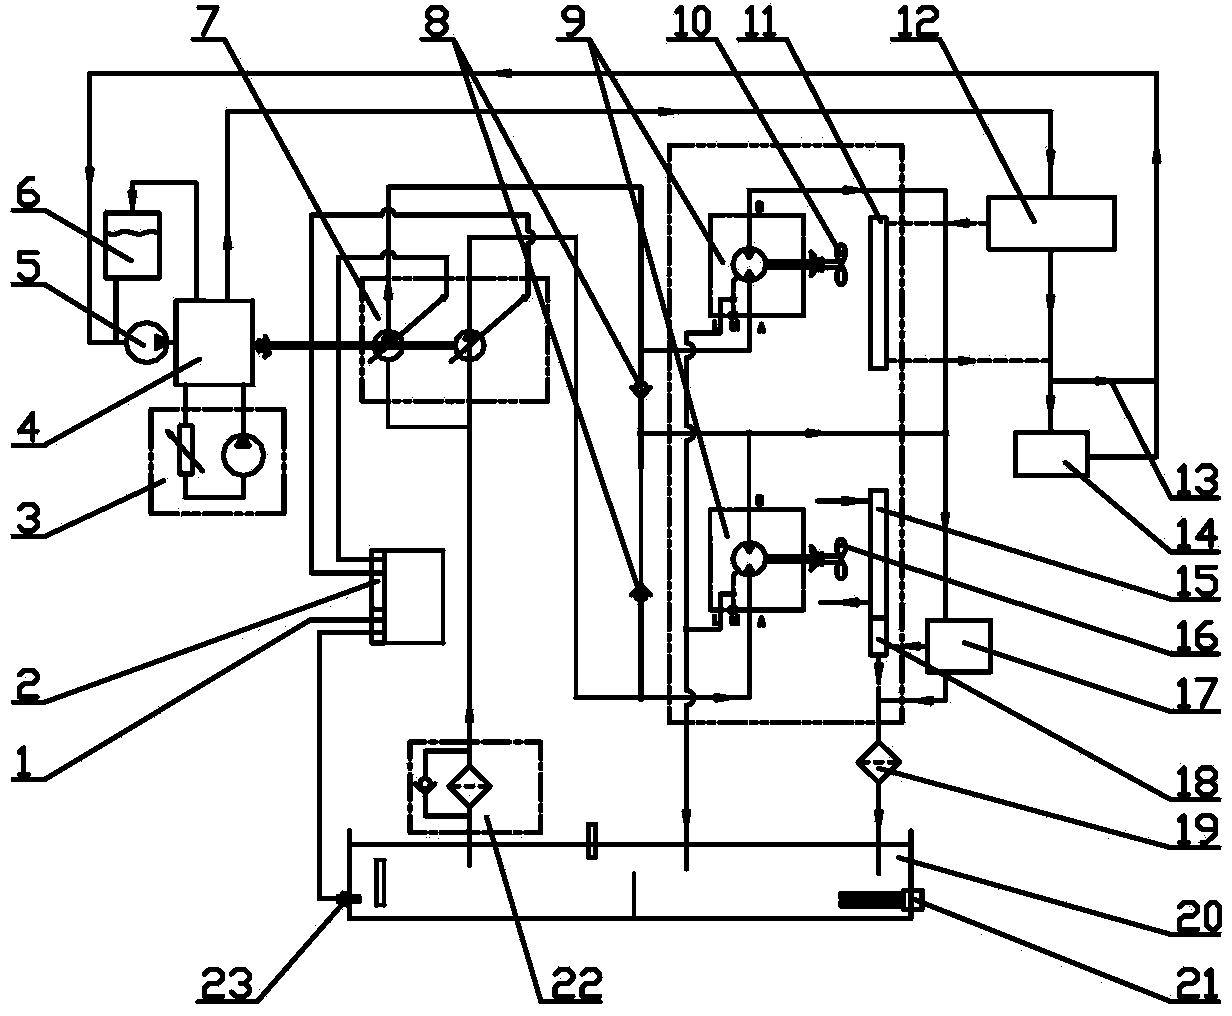 Power-distributed diesel motor train unit cooling system based on heat treatment system